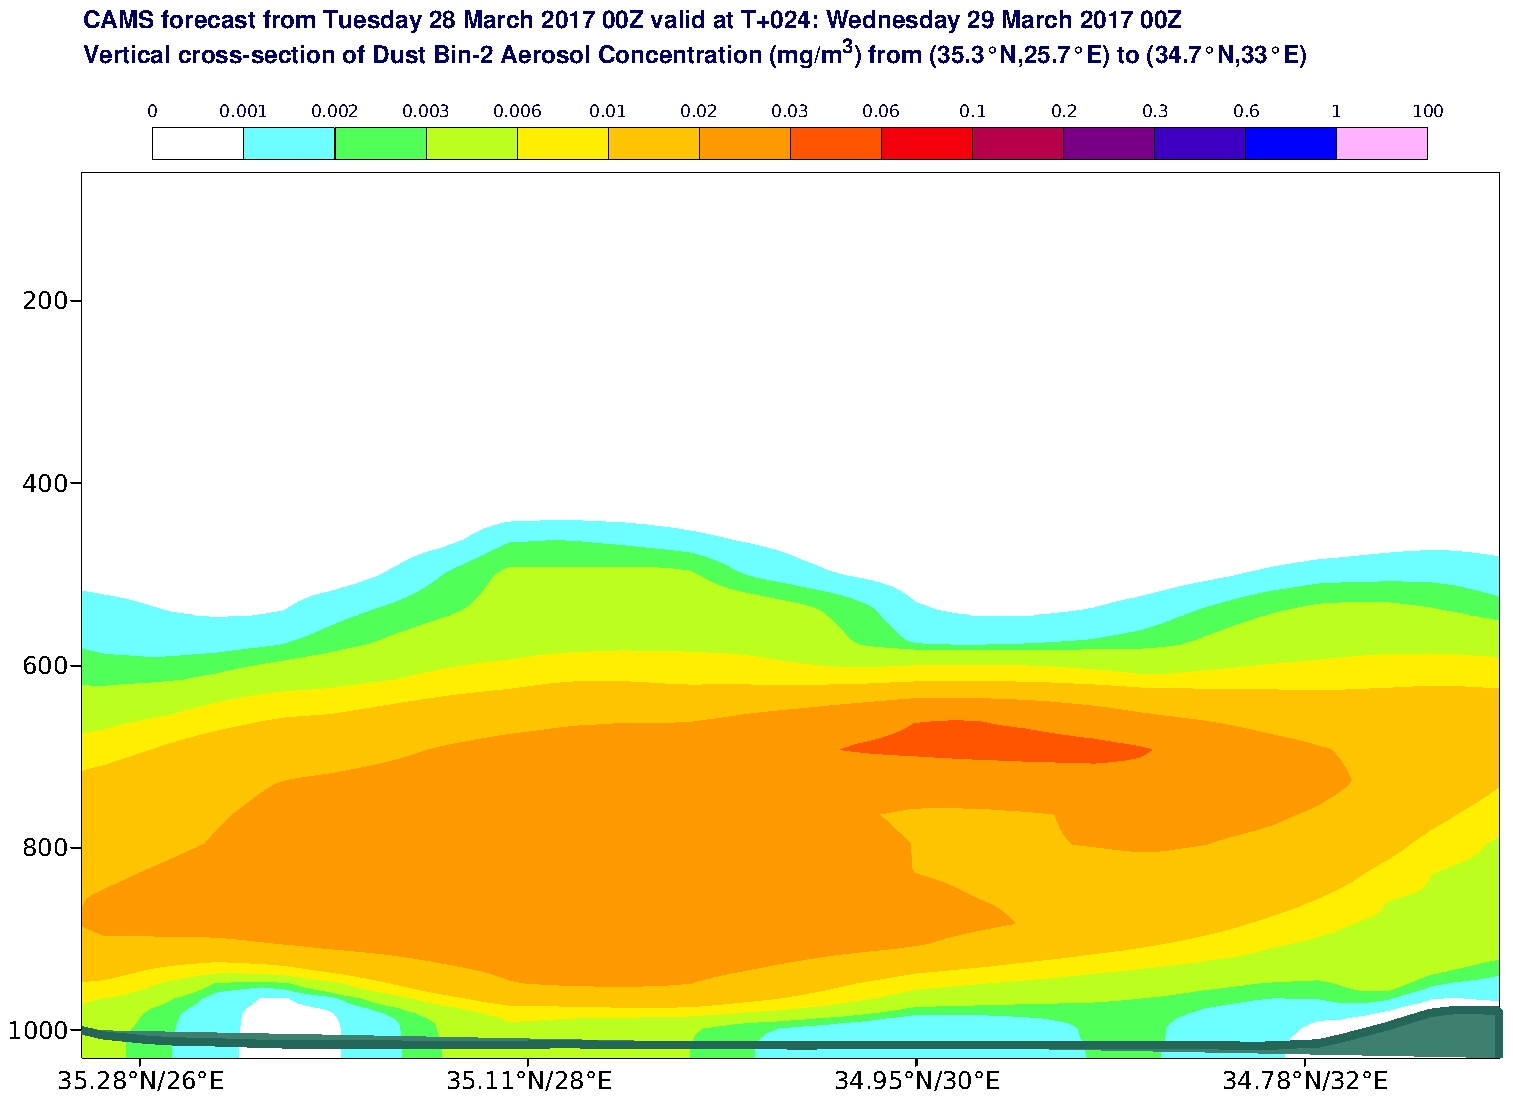 Vertical cross-section of Dust Bin-2 Aerosol Concentration (mg/m3) valid at T24 - 2017-03-29 00:00